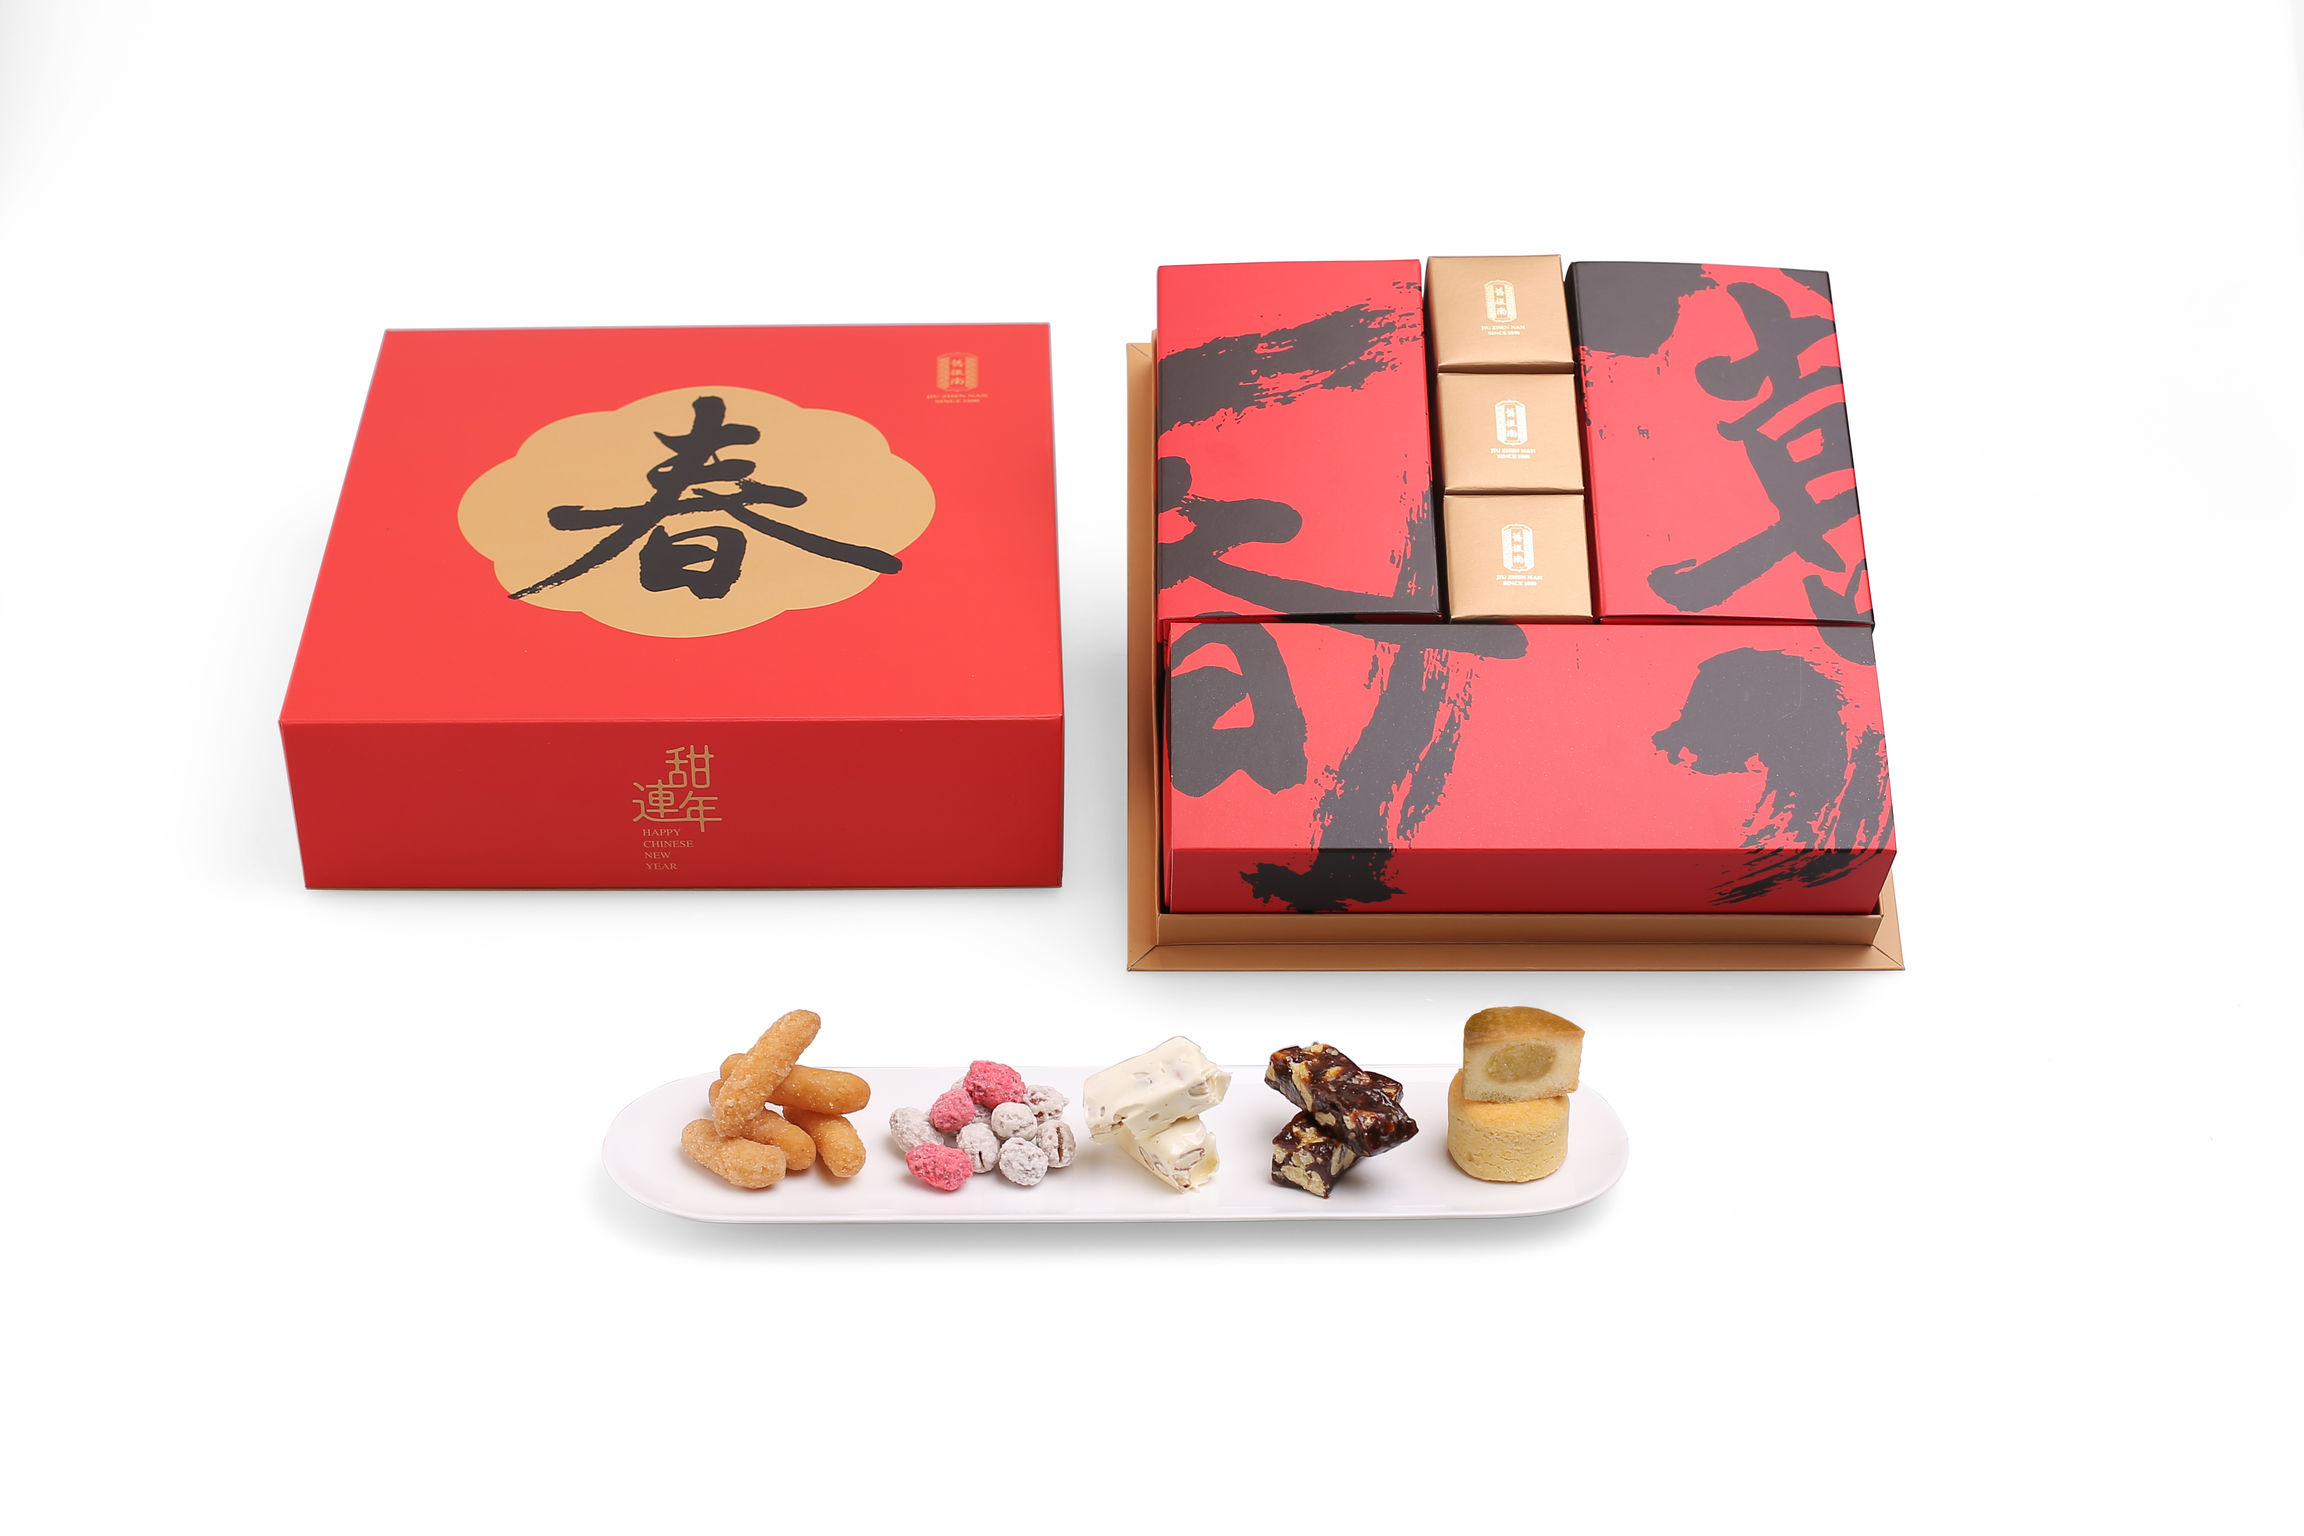 CHINESE NEW YEAR GIFT BOX Entry iF WORLD DESIGN GUIDE